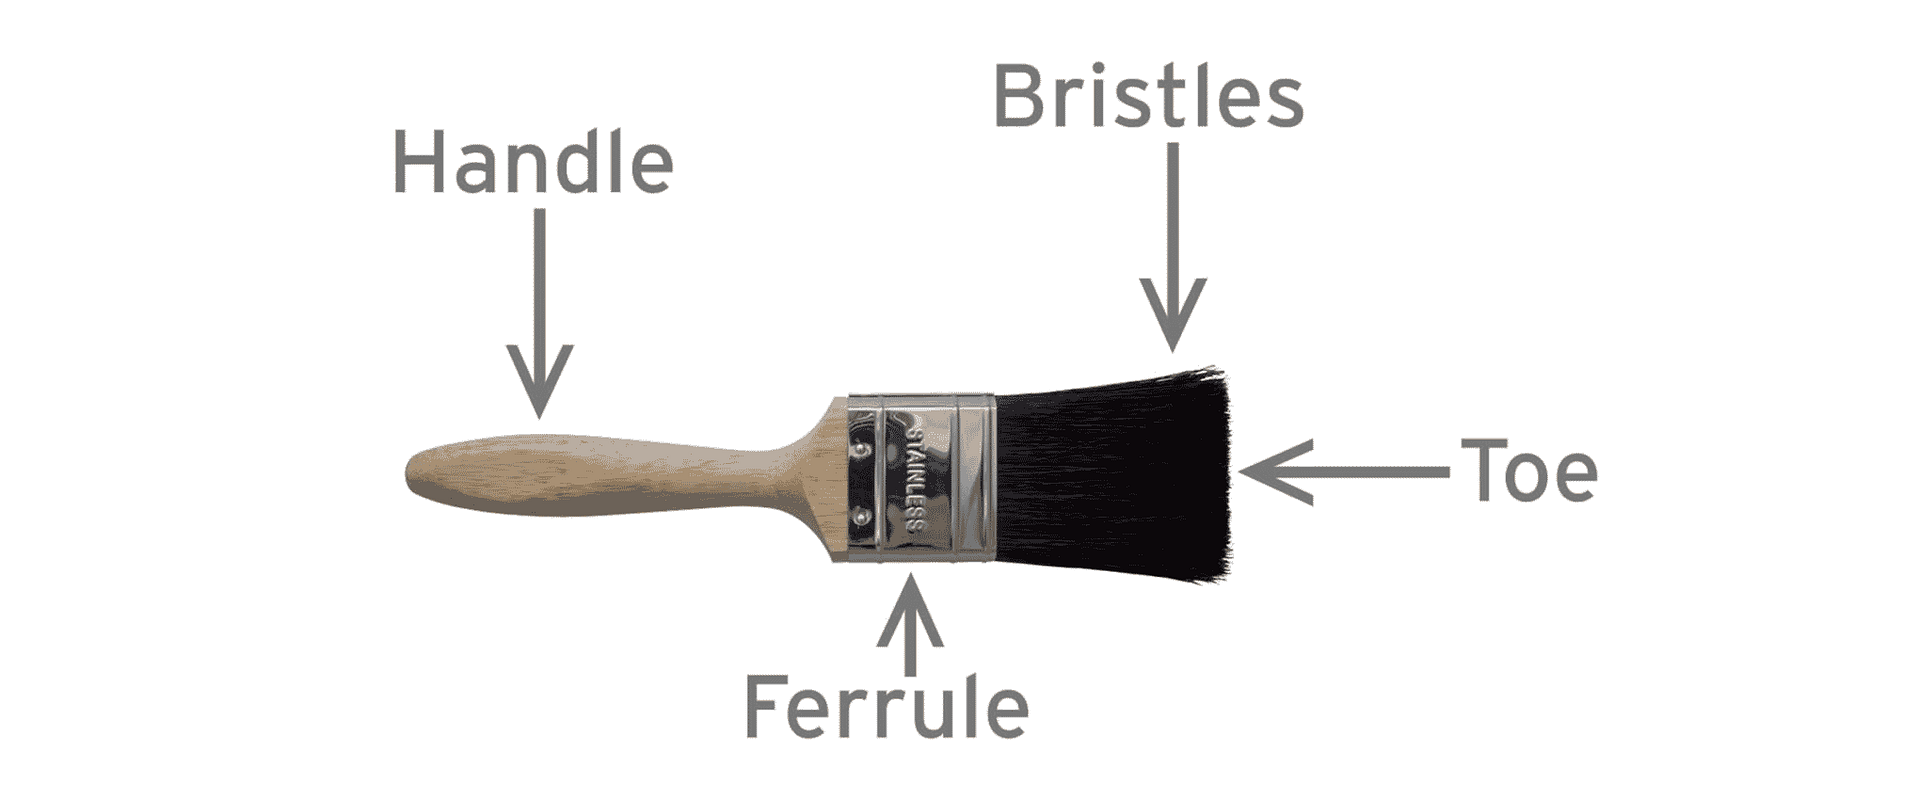 How to Choose a Paint Brush for Your DIY Project